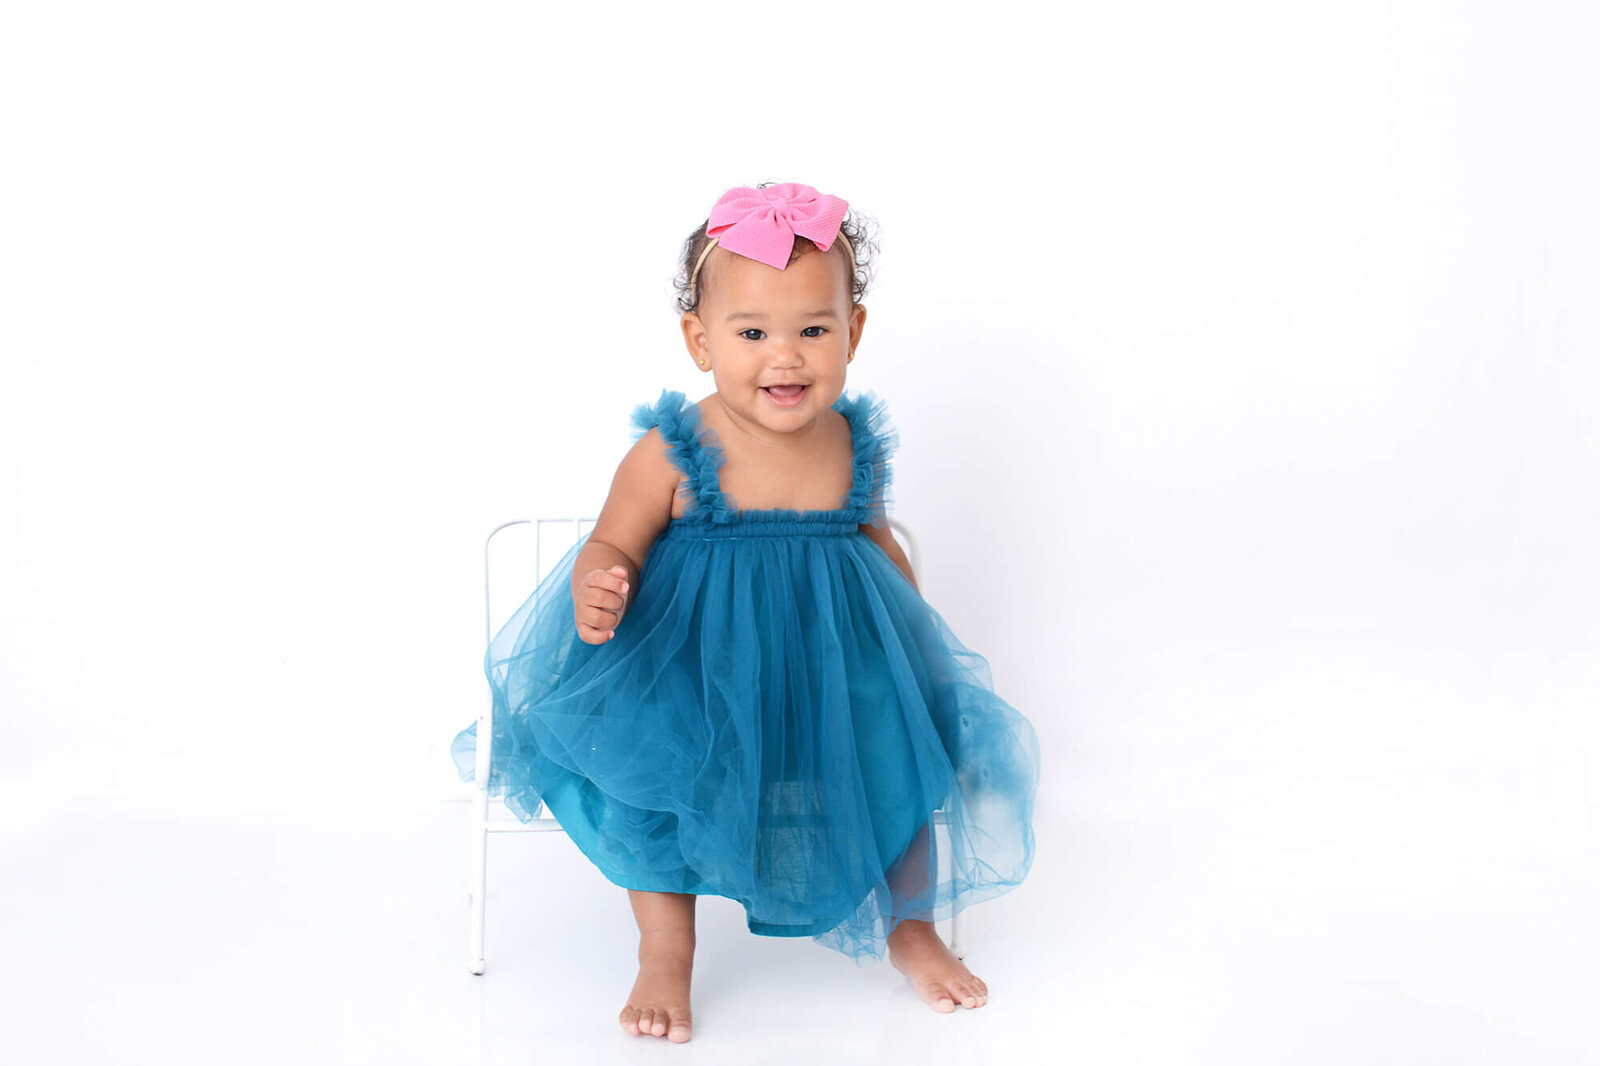 one year old girl smiles at the camera while wearing a light blue dress